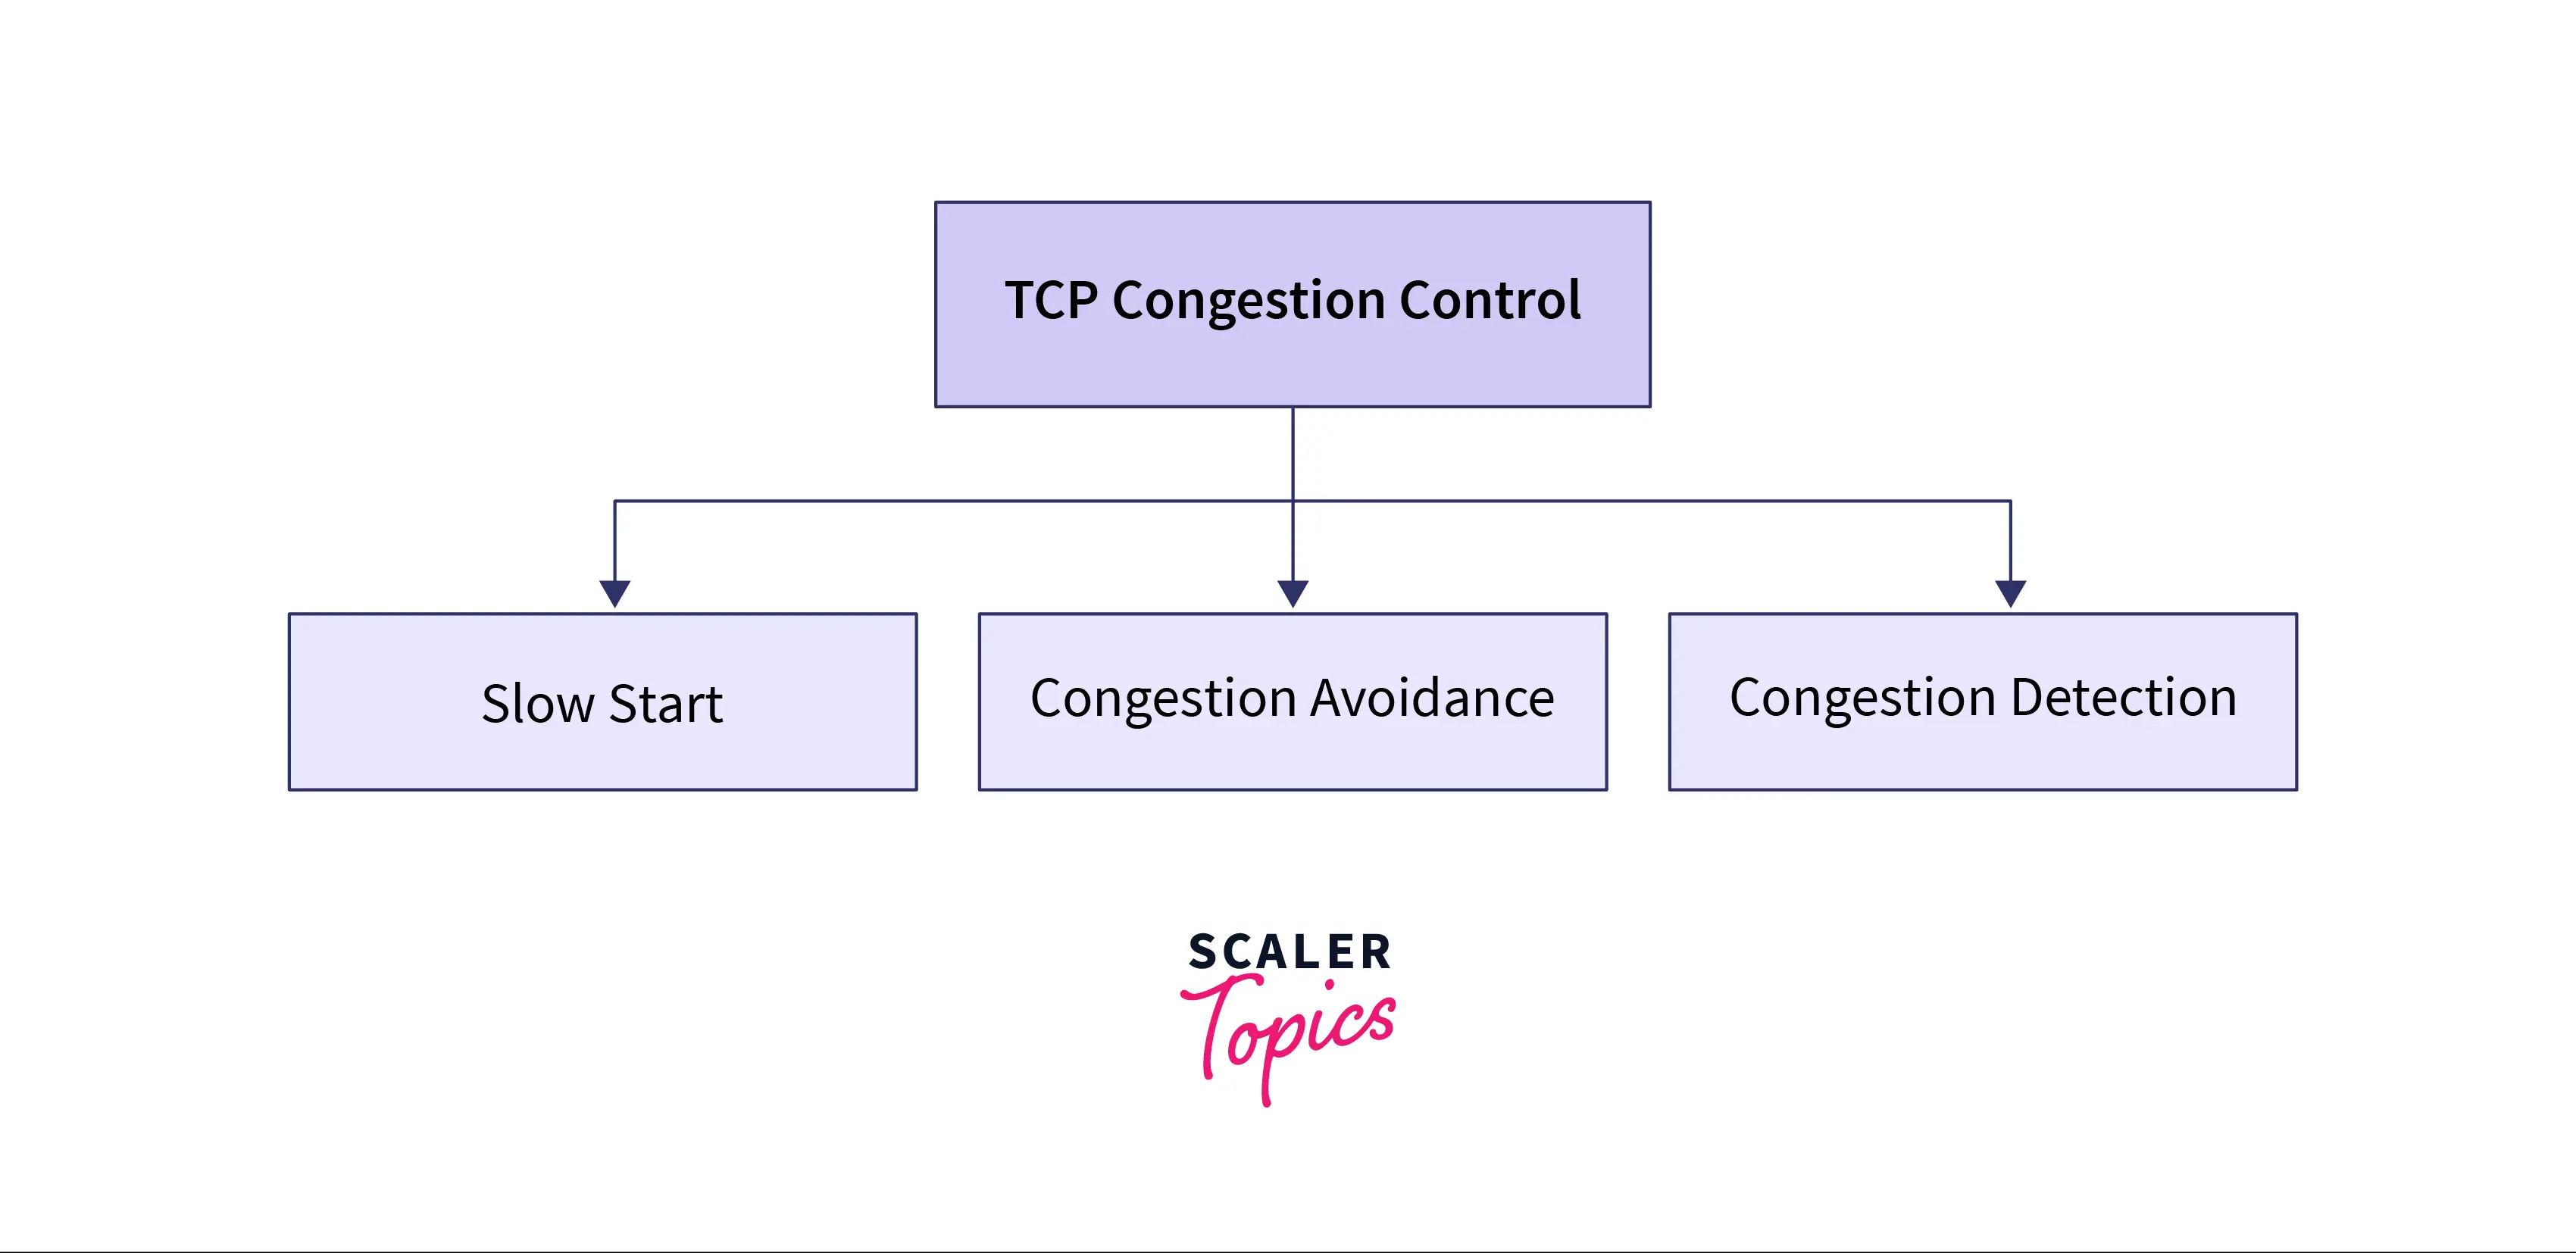 Approaches for congestion control